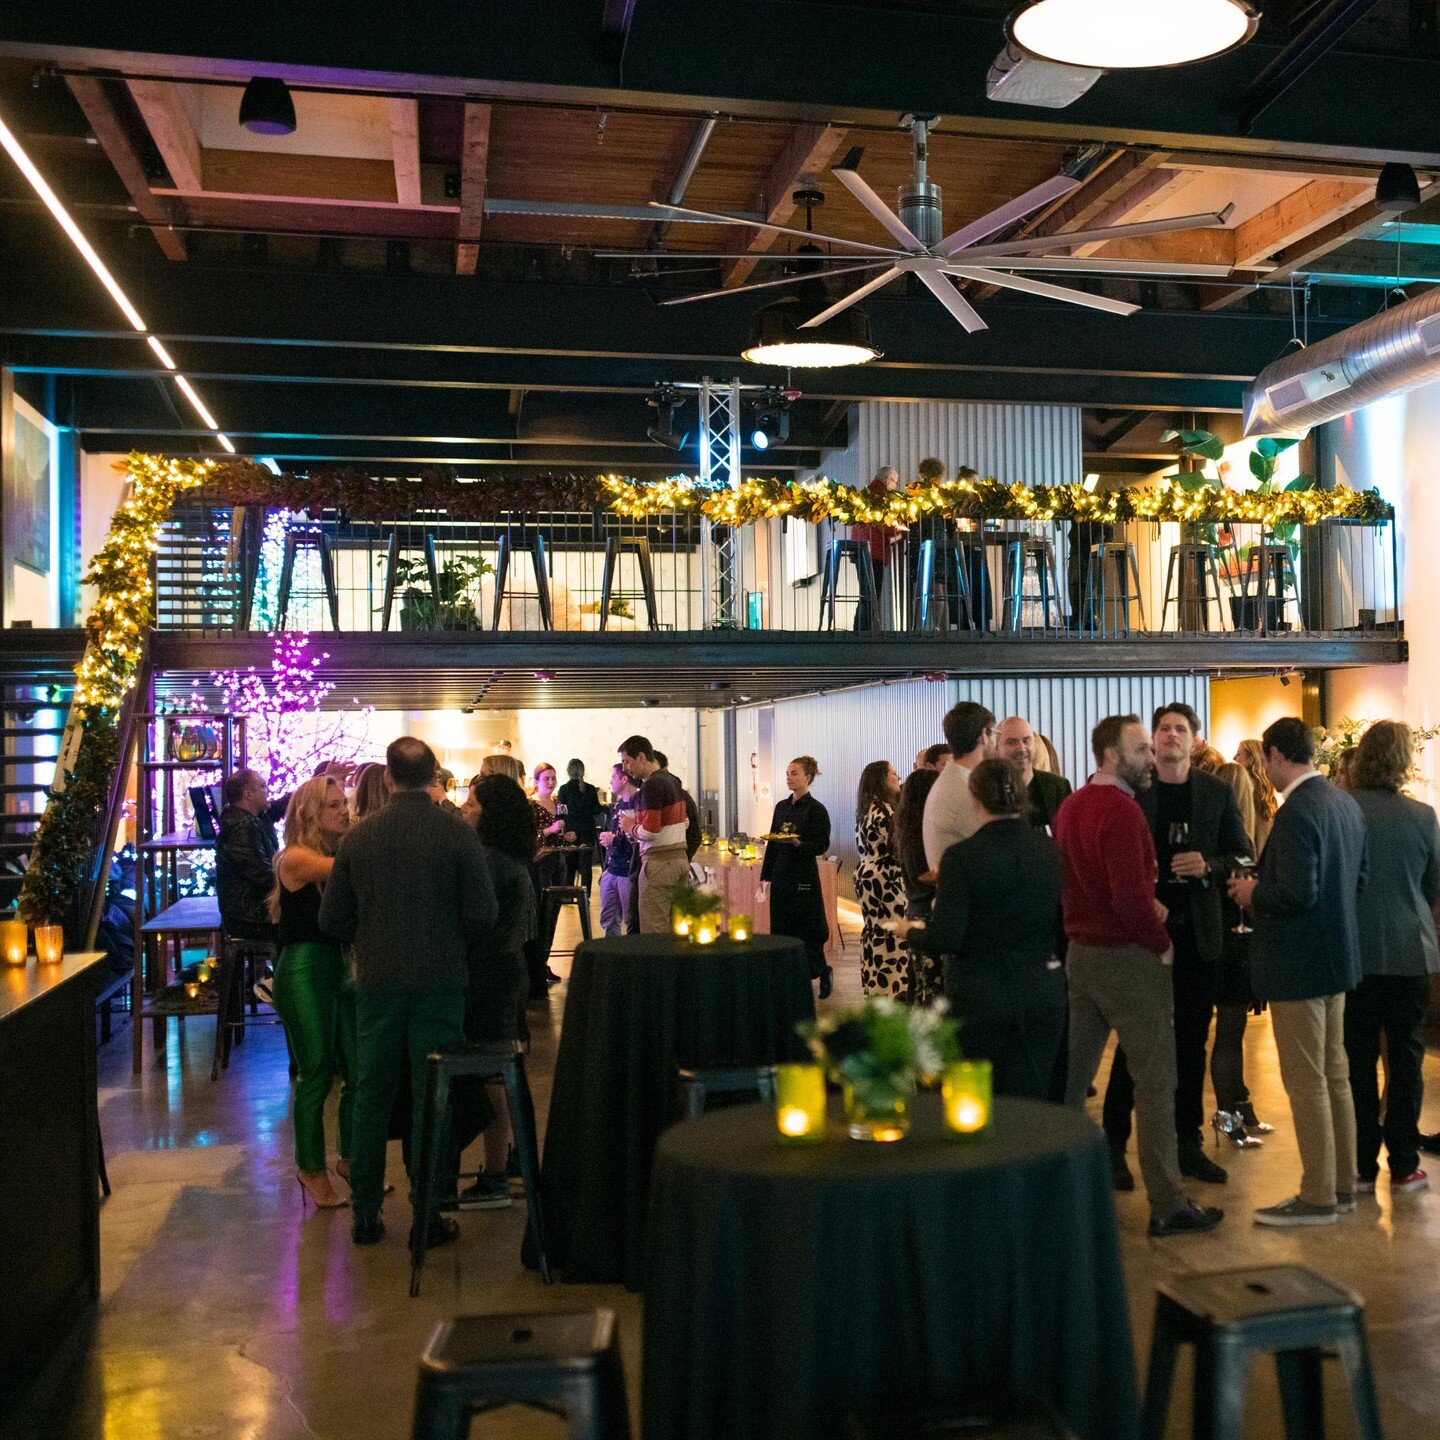 The mission at Stone Way Auto is to provide an inclusive and vibrant event space that celebrates life, fosters community, and supports non-profit organizations. Contact us at our website to book a tour, and start planning your next non-profit fundrai